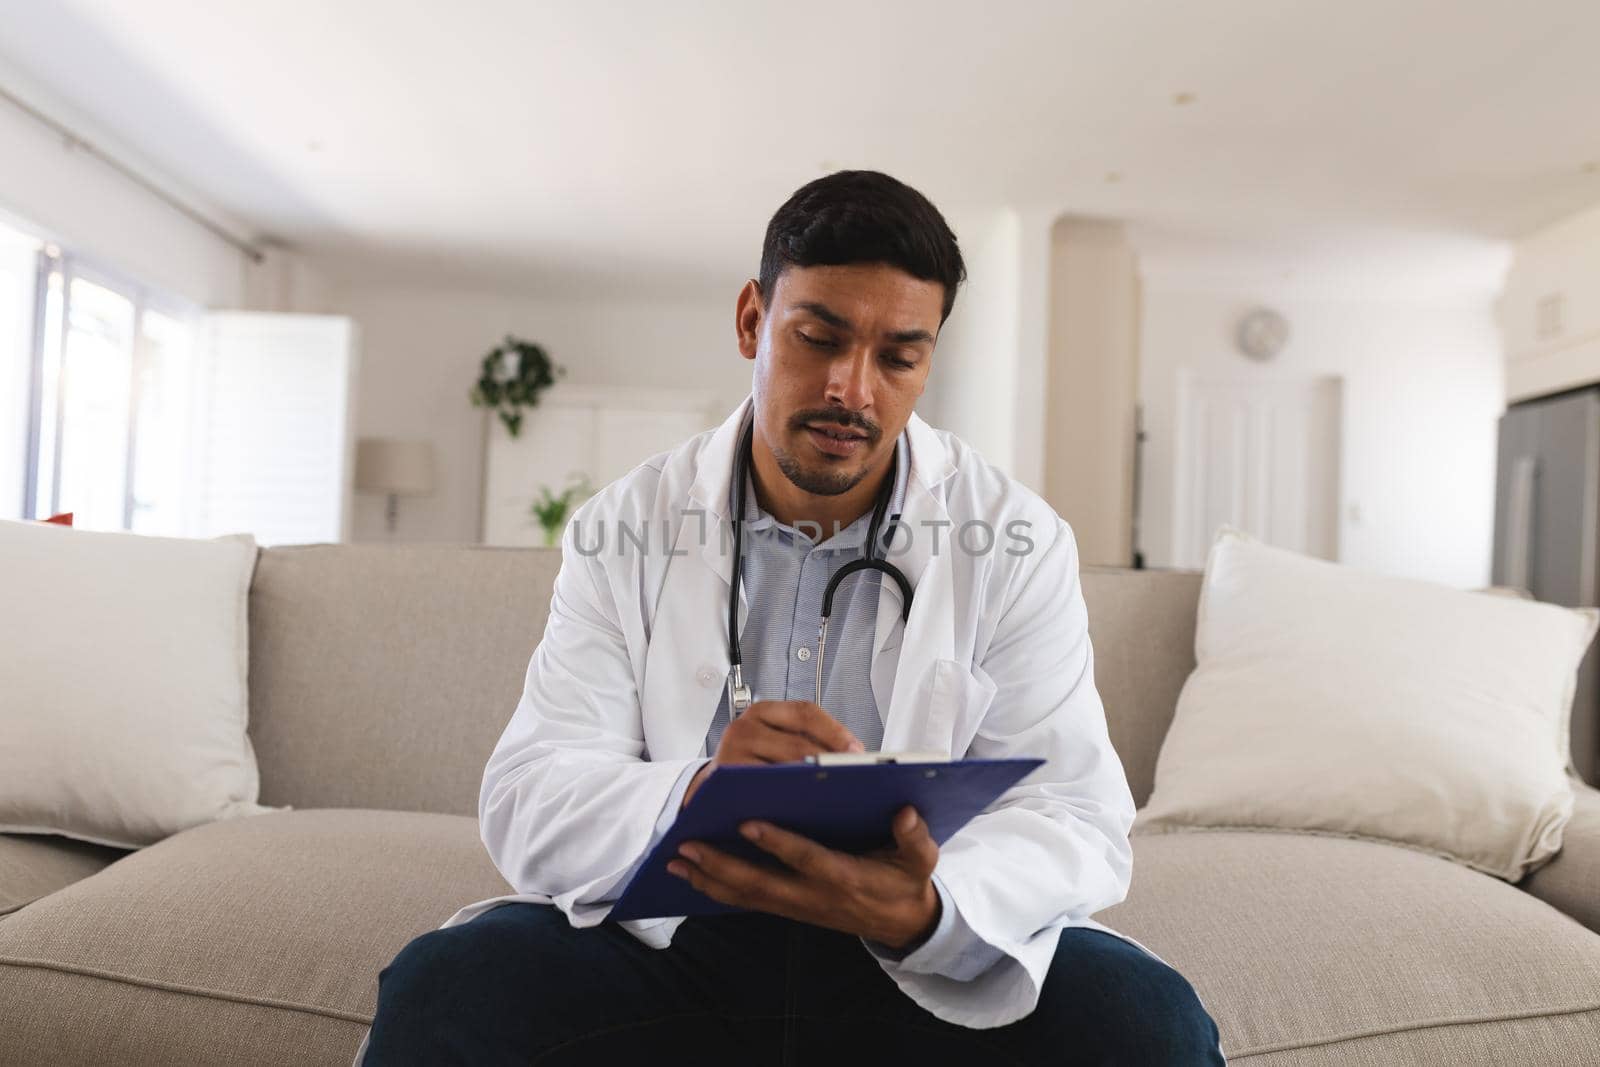 Hispanic male doctor sitting on couch making notes during consultation video call by Wavebreakmedia